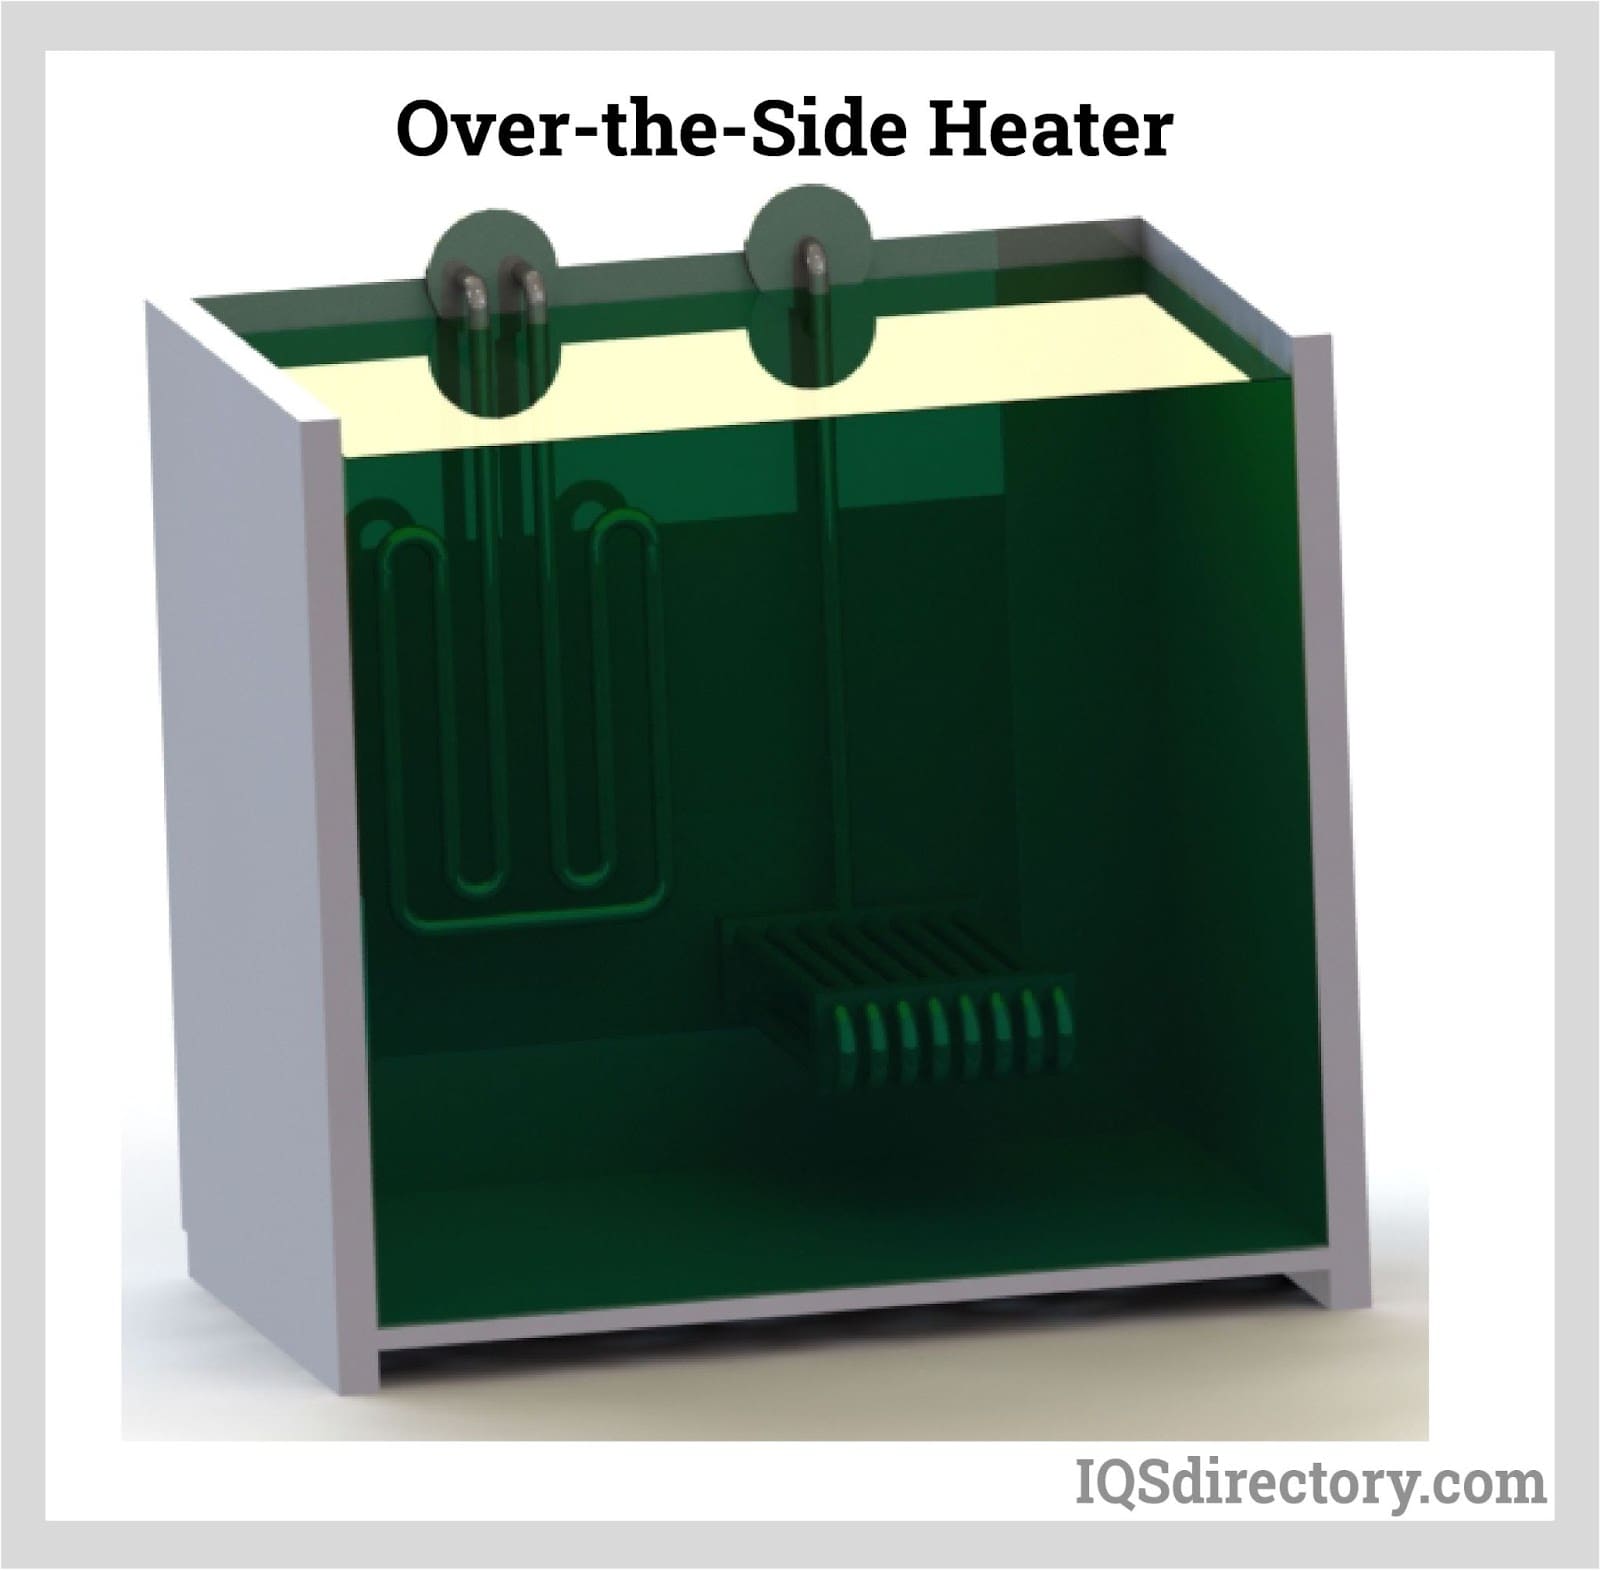 Over-the-Side Heater